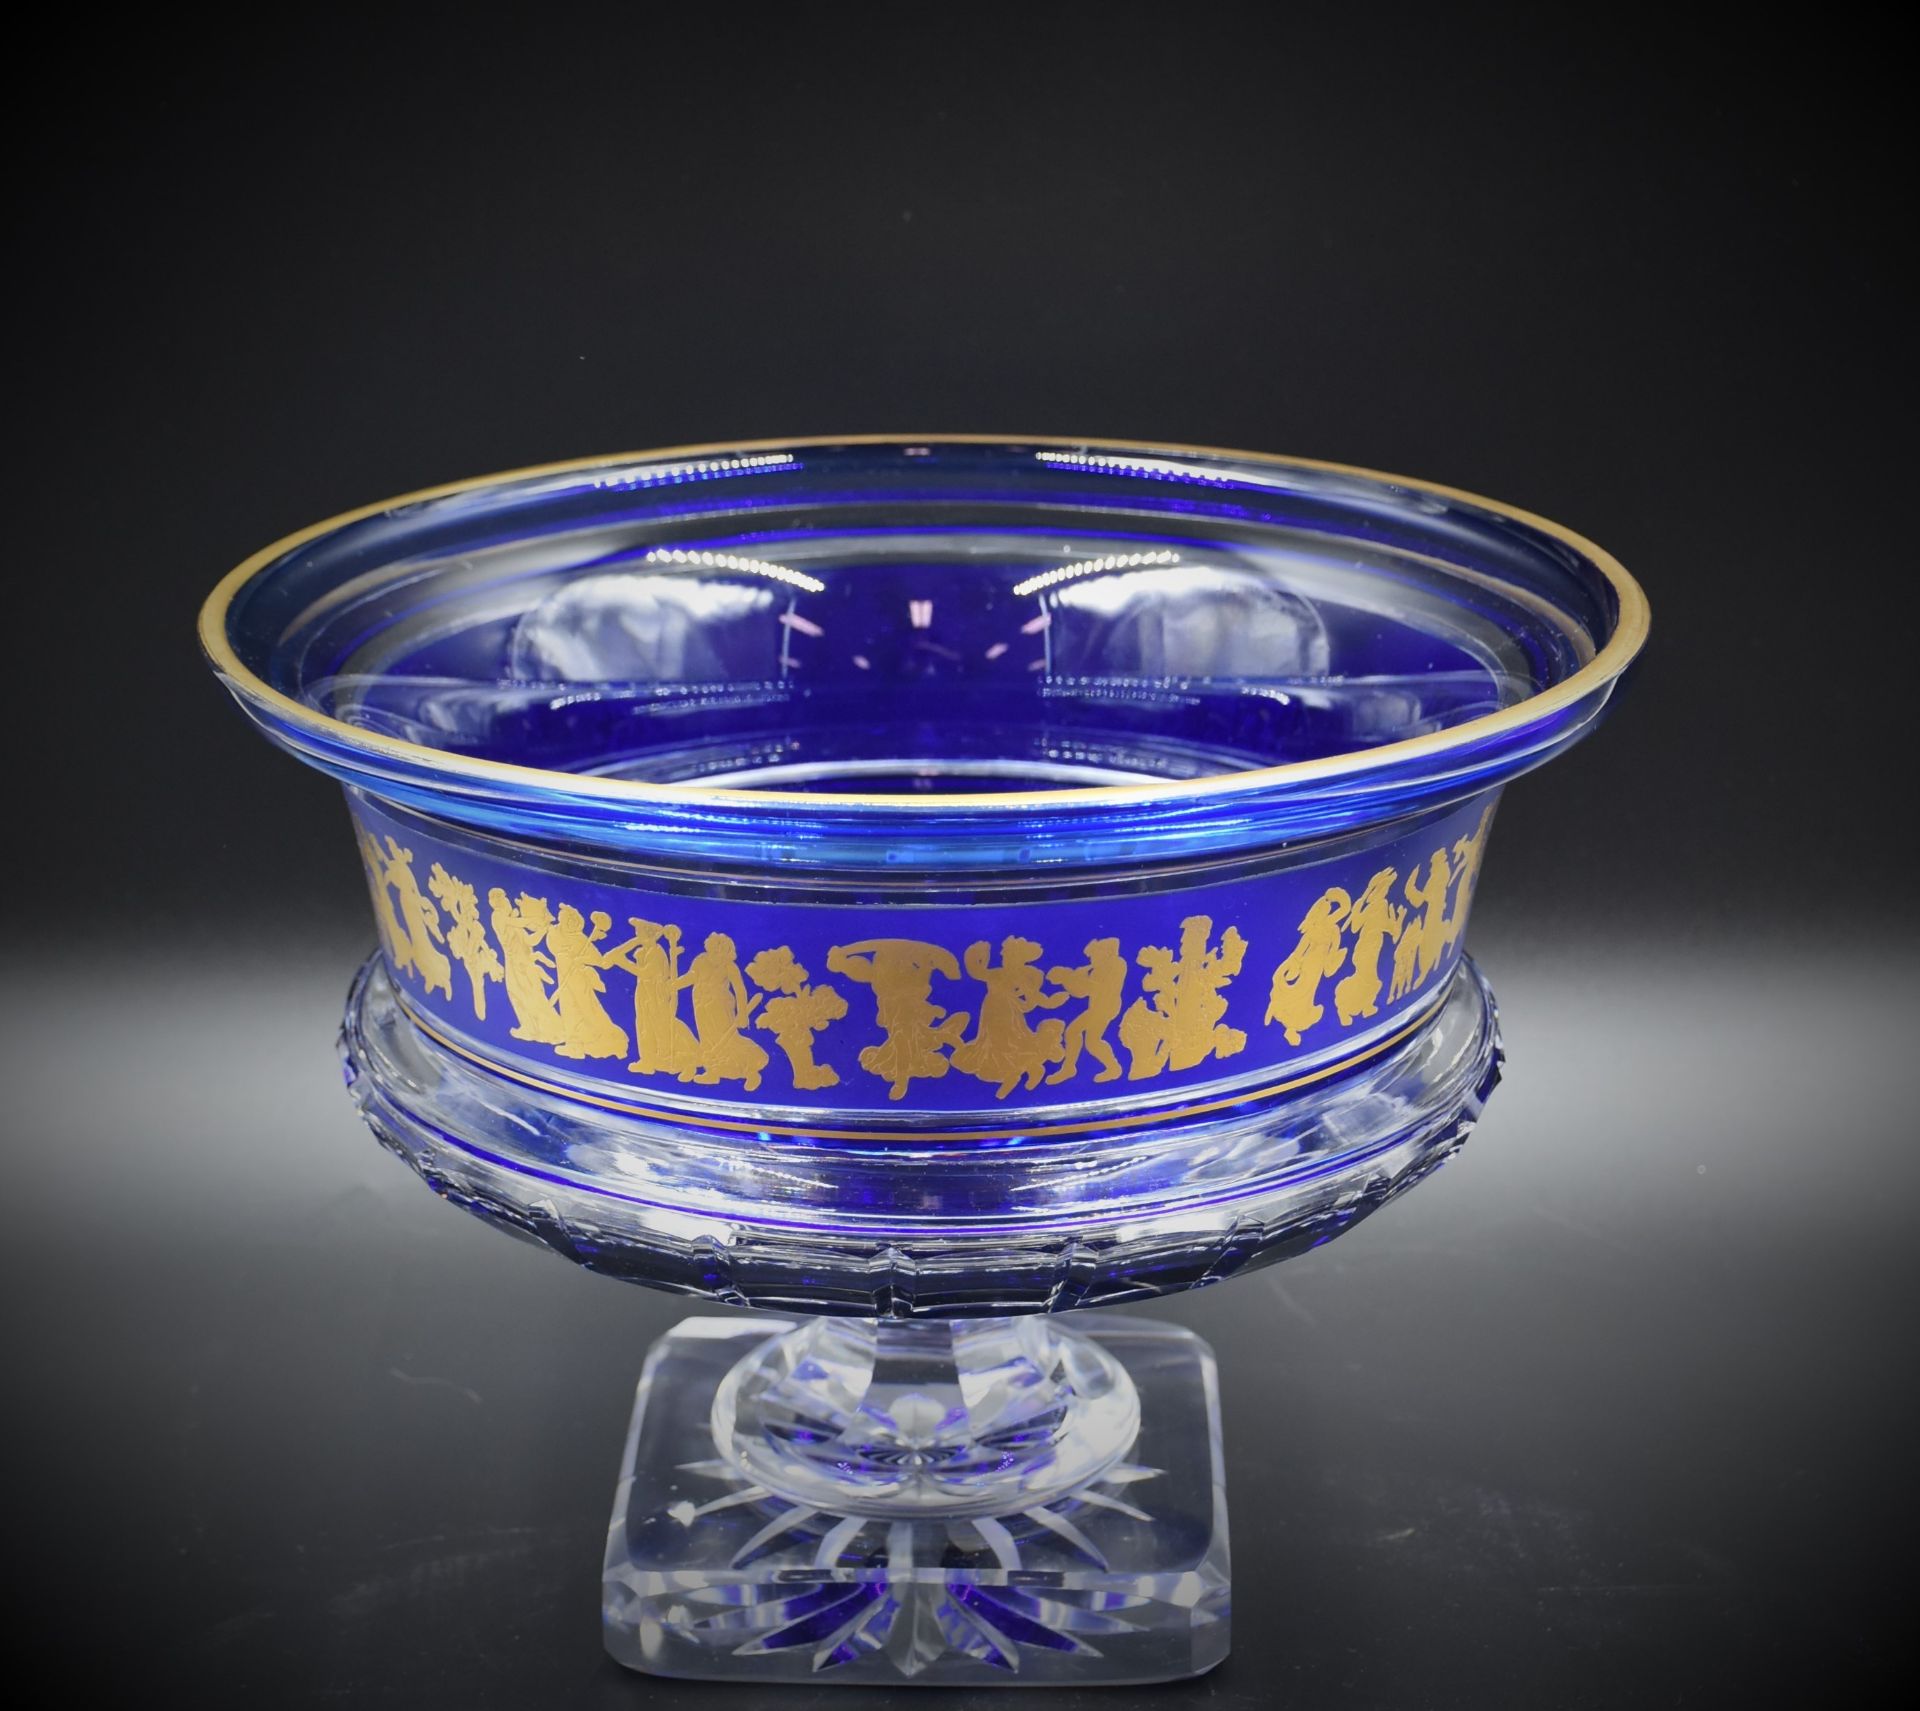 A Val St Lambert crystal "Borodine" cup on a cobalt blue cut clear crystal pedestal with 24-carat